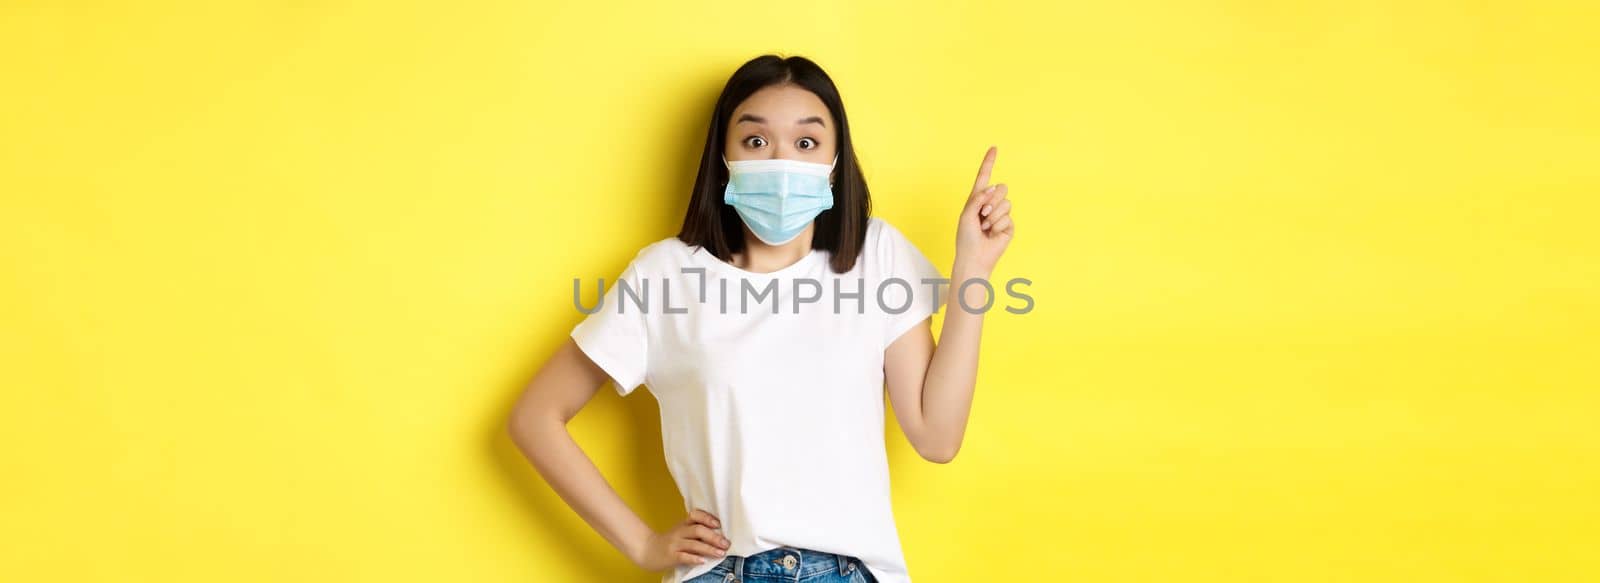 Covid, health care and pandemic concept. Asian female model in medical mask and white t-shirt pointing finger at upper left corner logo, showing promotion, yellow background.